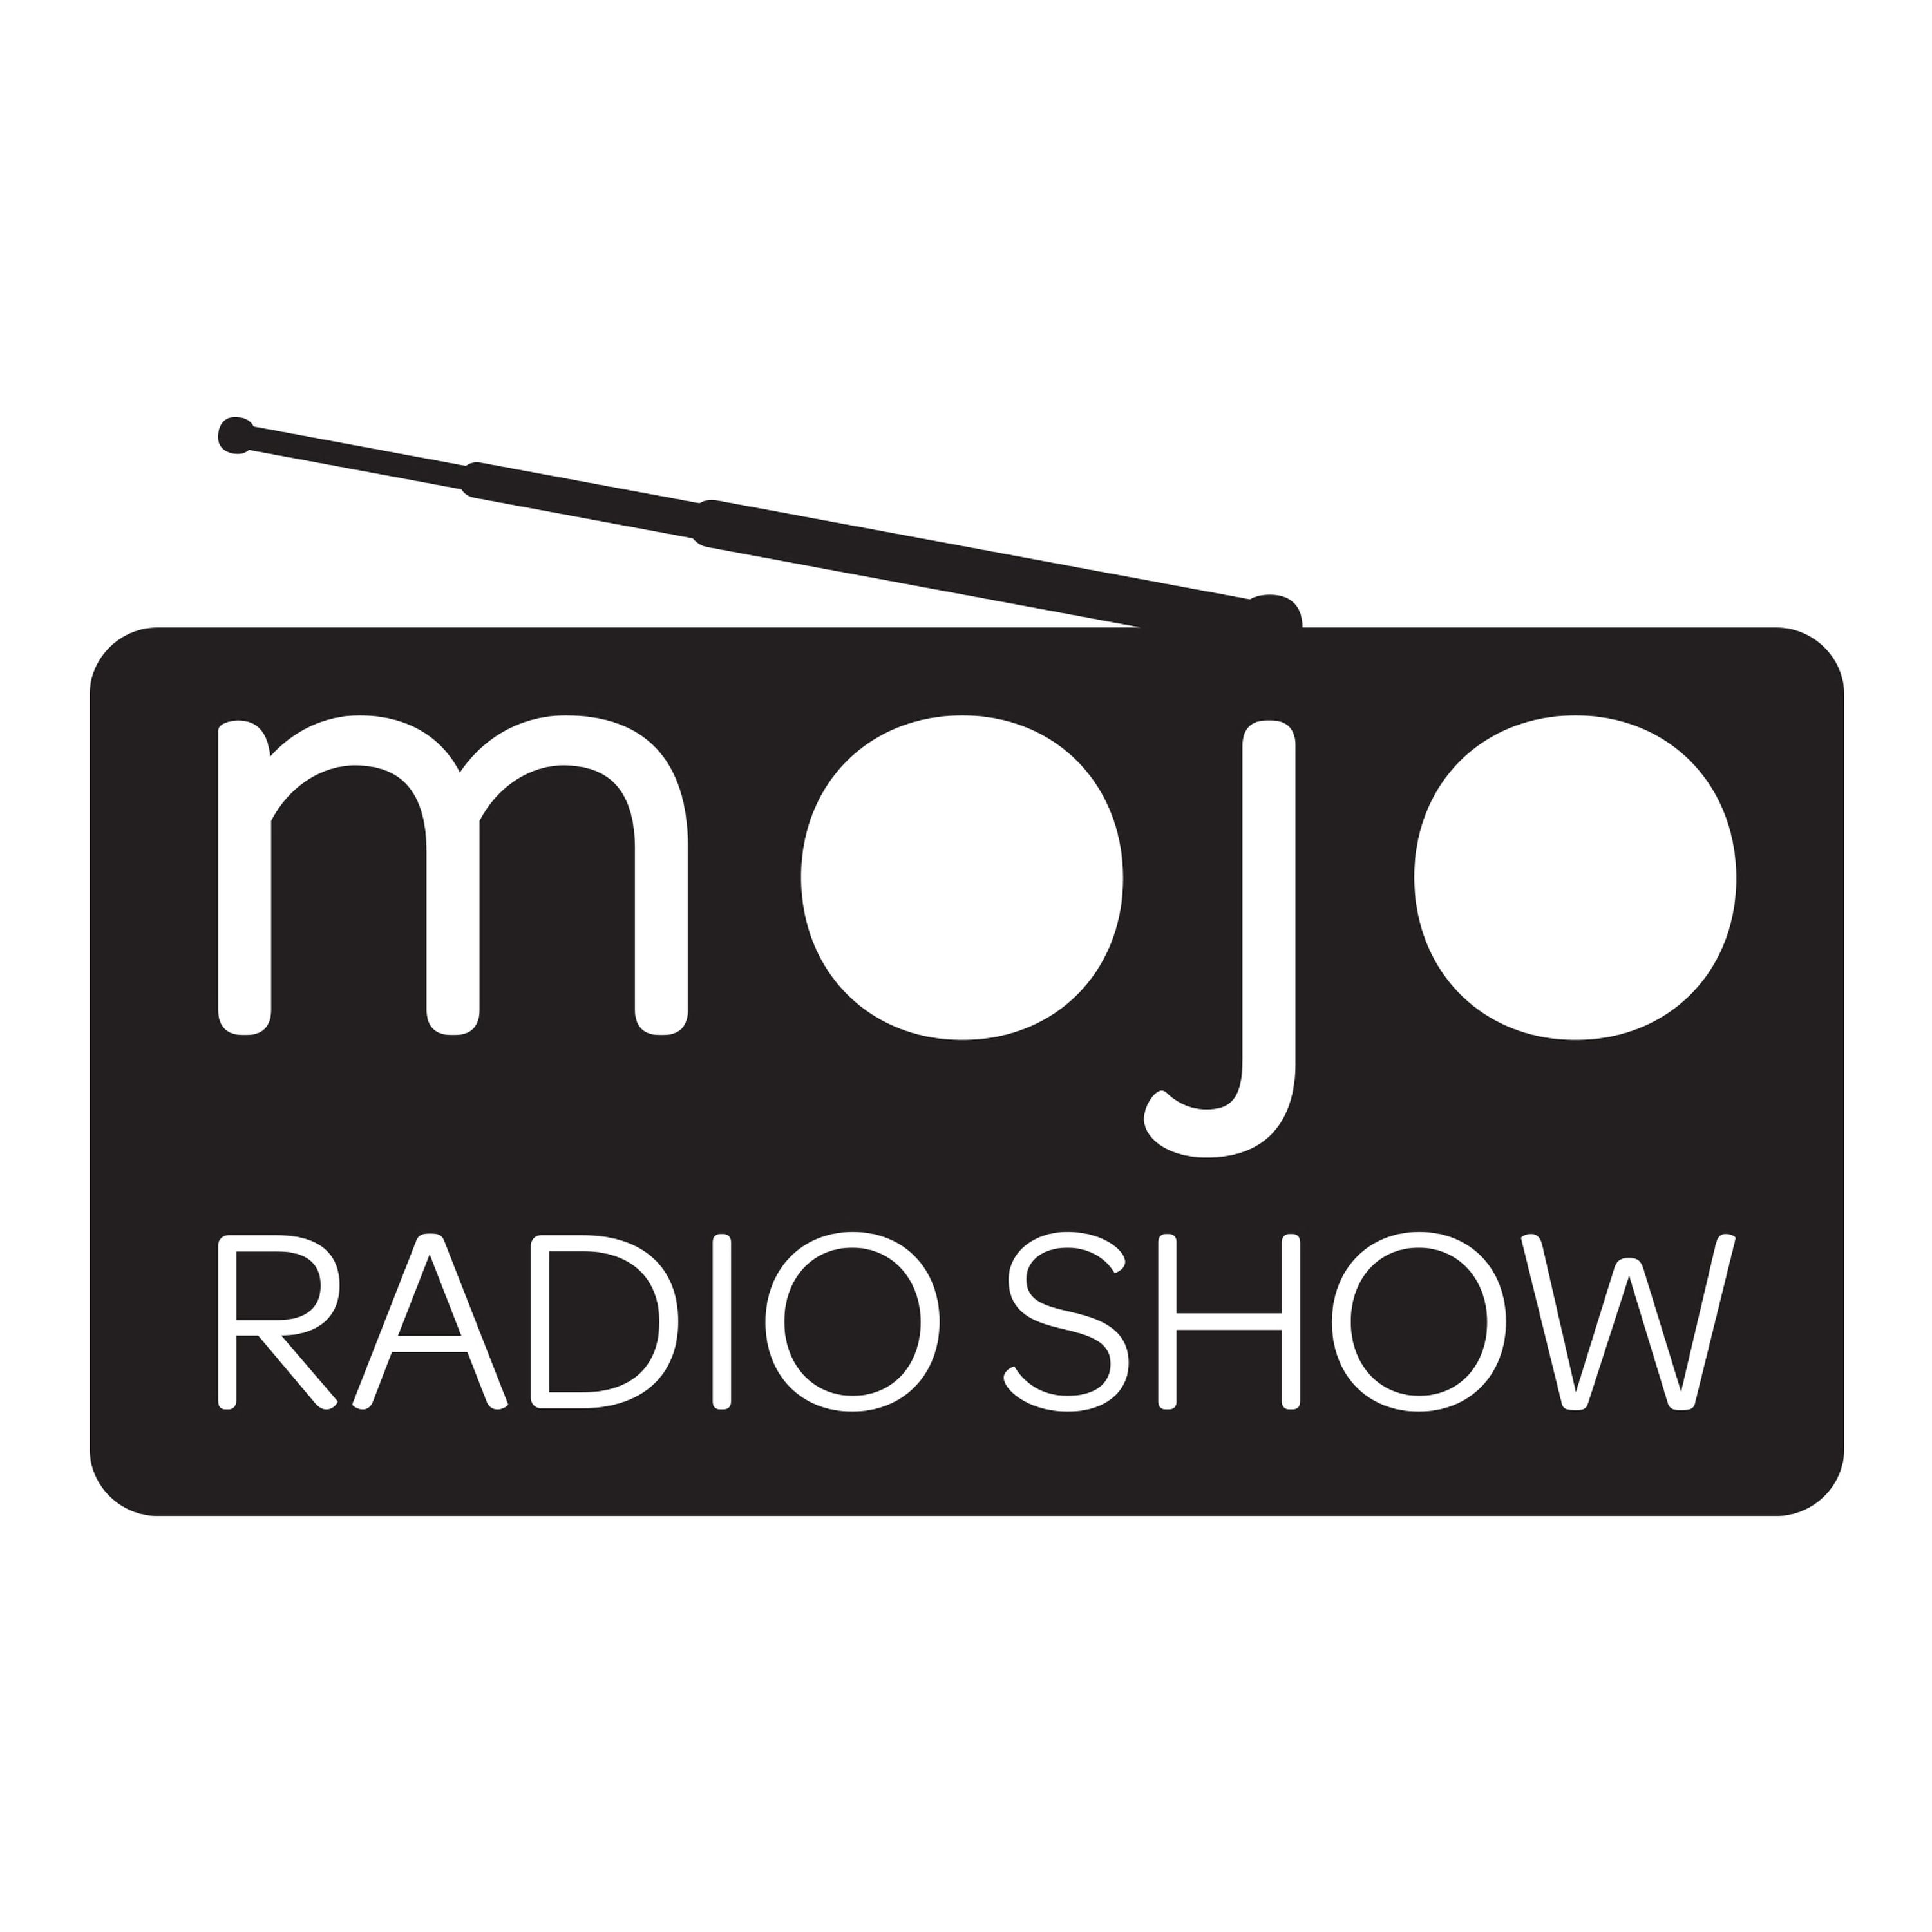 The Mojo Radio Show - Ep 120: Have you got the guts to be your best? The Fermented Man Derek Dillinger.